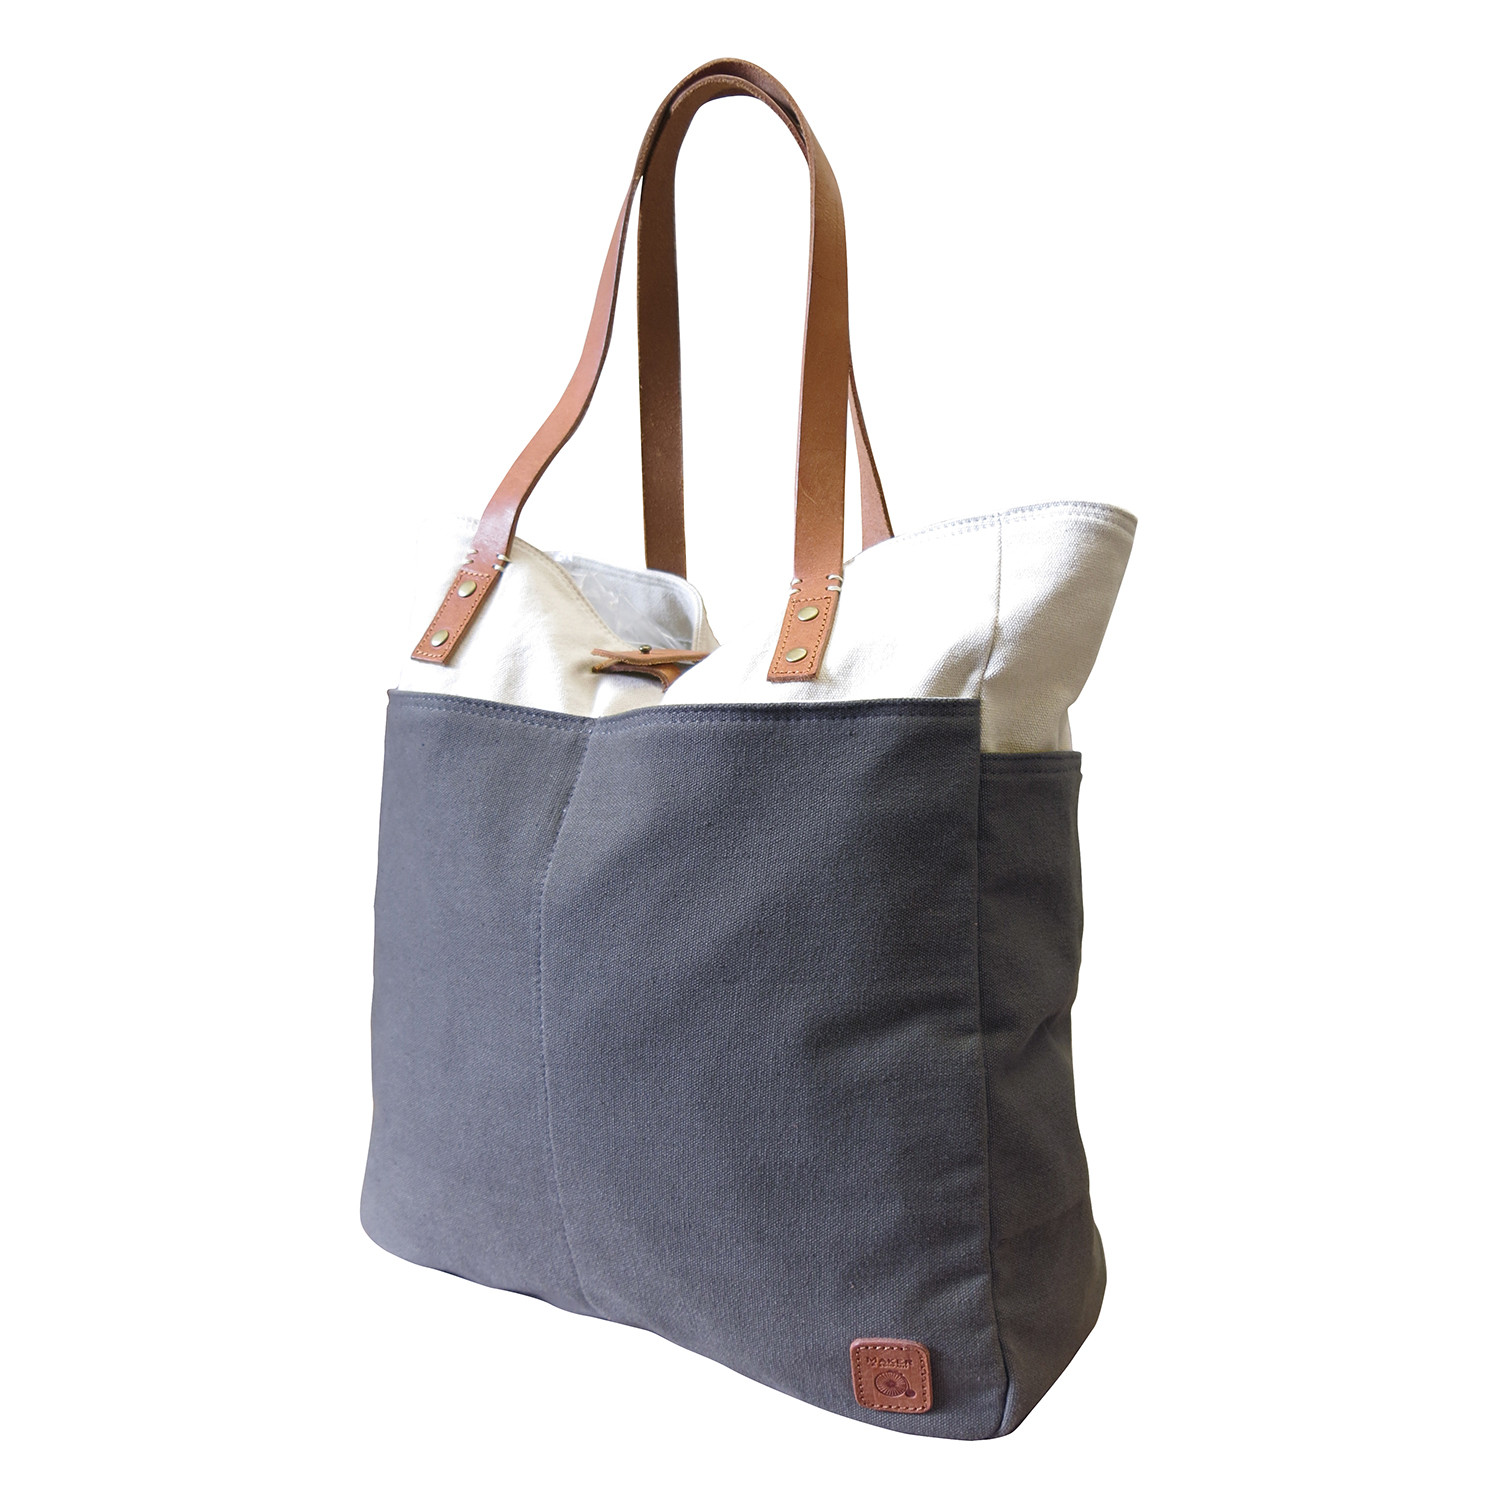 Two Tone Washed Canvas Shoulder Tote Bag // Grey - Maker & Company - Touch of Modern